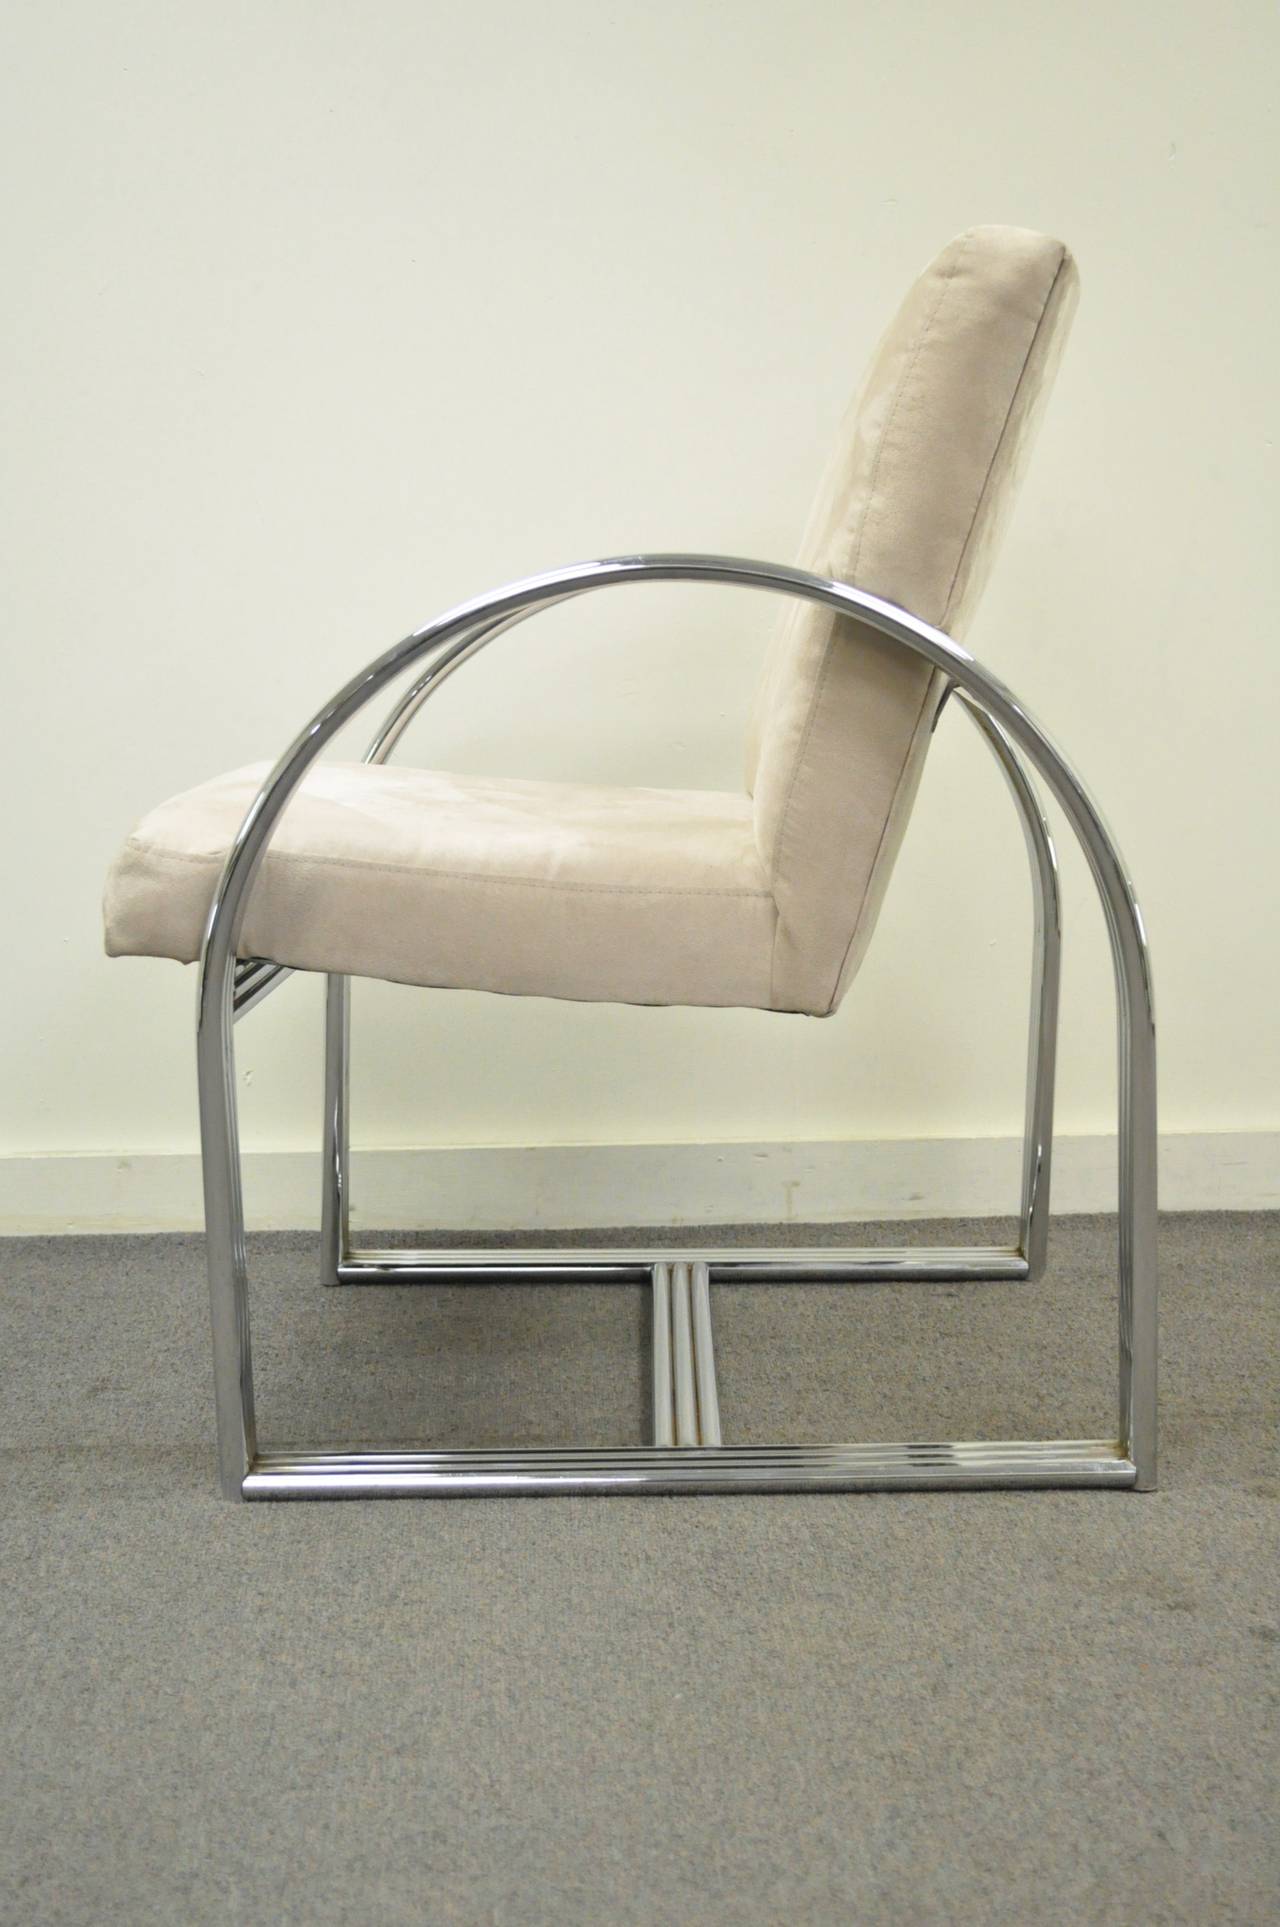 Very unique and Rare Mid Century Modern, Milo Baughman for Thayer Coggin, Triple Chrome Band Lounge Chair in the Art Deco / Bauhaus Style. Item features a dramatically arched chrome frame, stretcher supported base, high quality construction, and